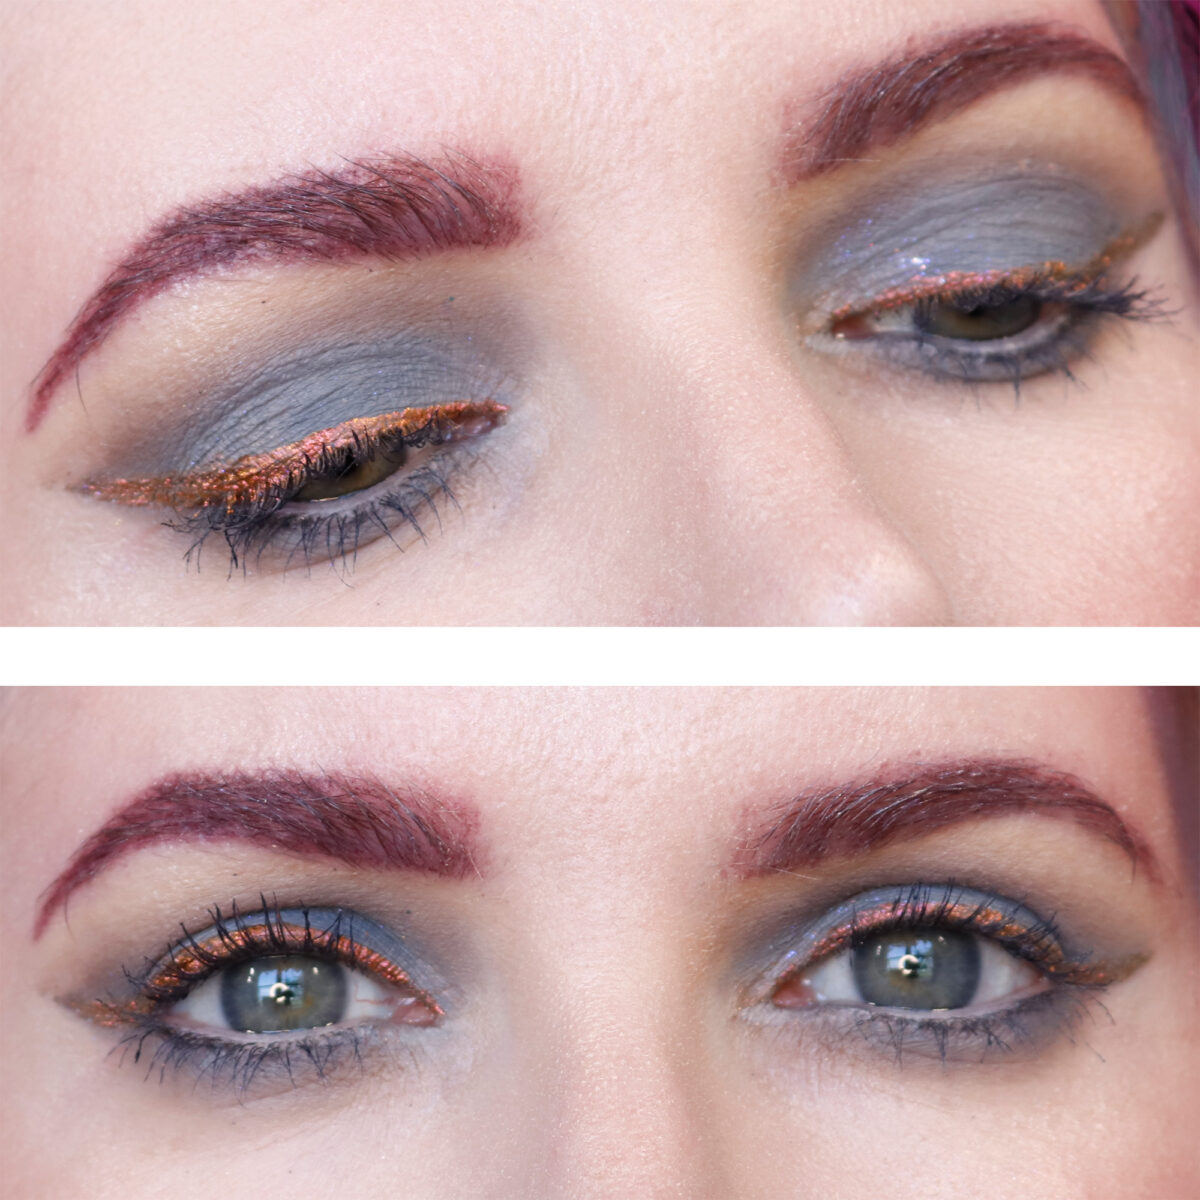 About Face Grey and Orange Makeup Inspiration with Holographic Eye Paint